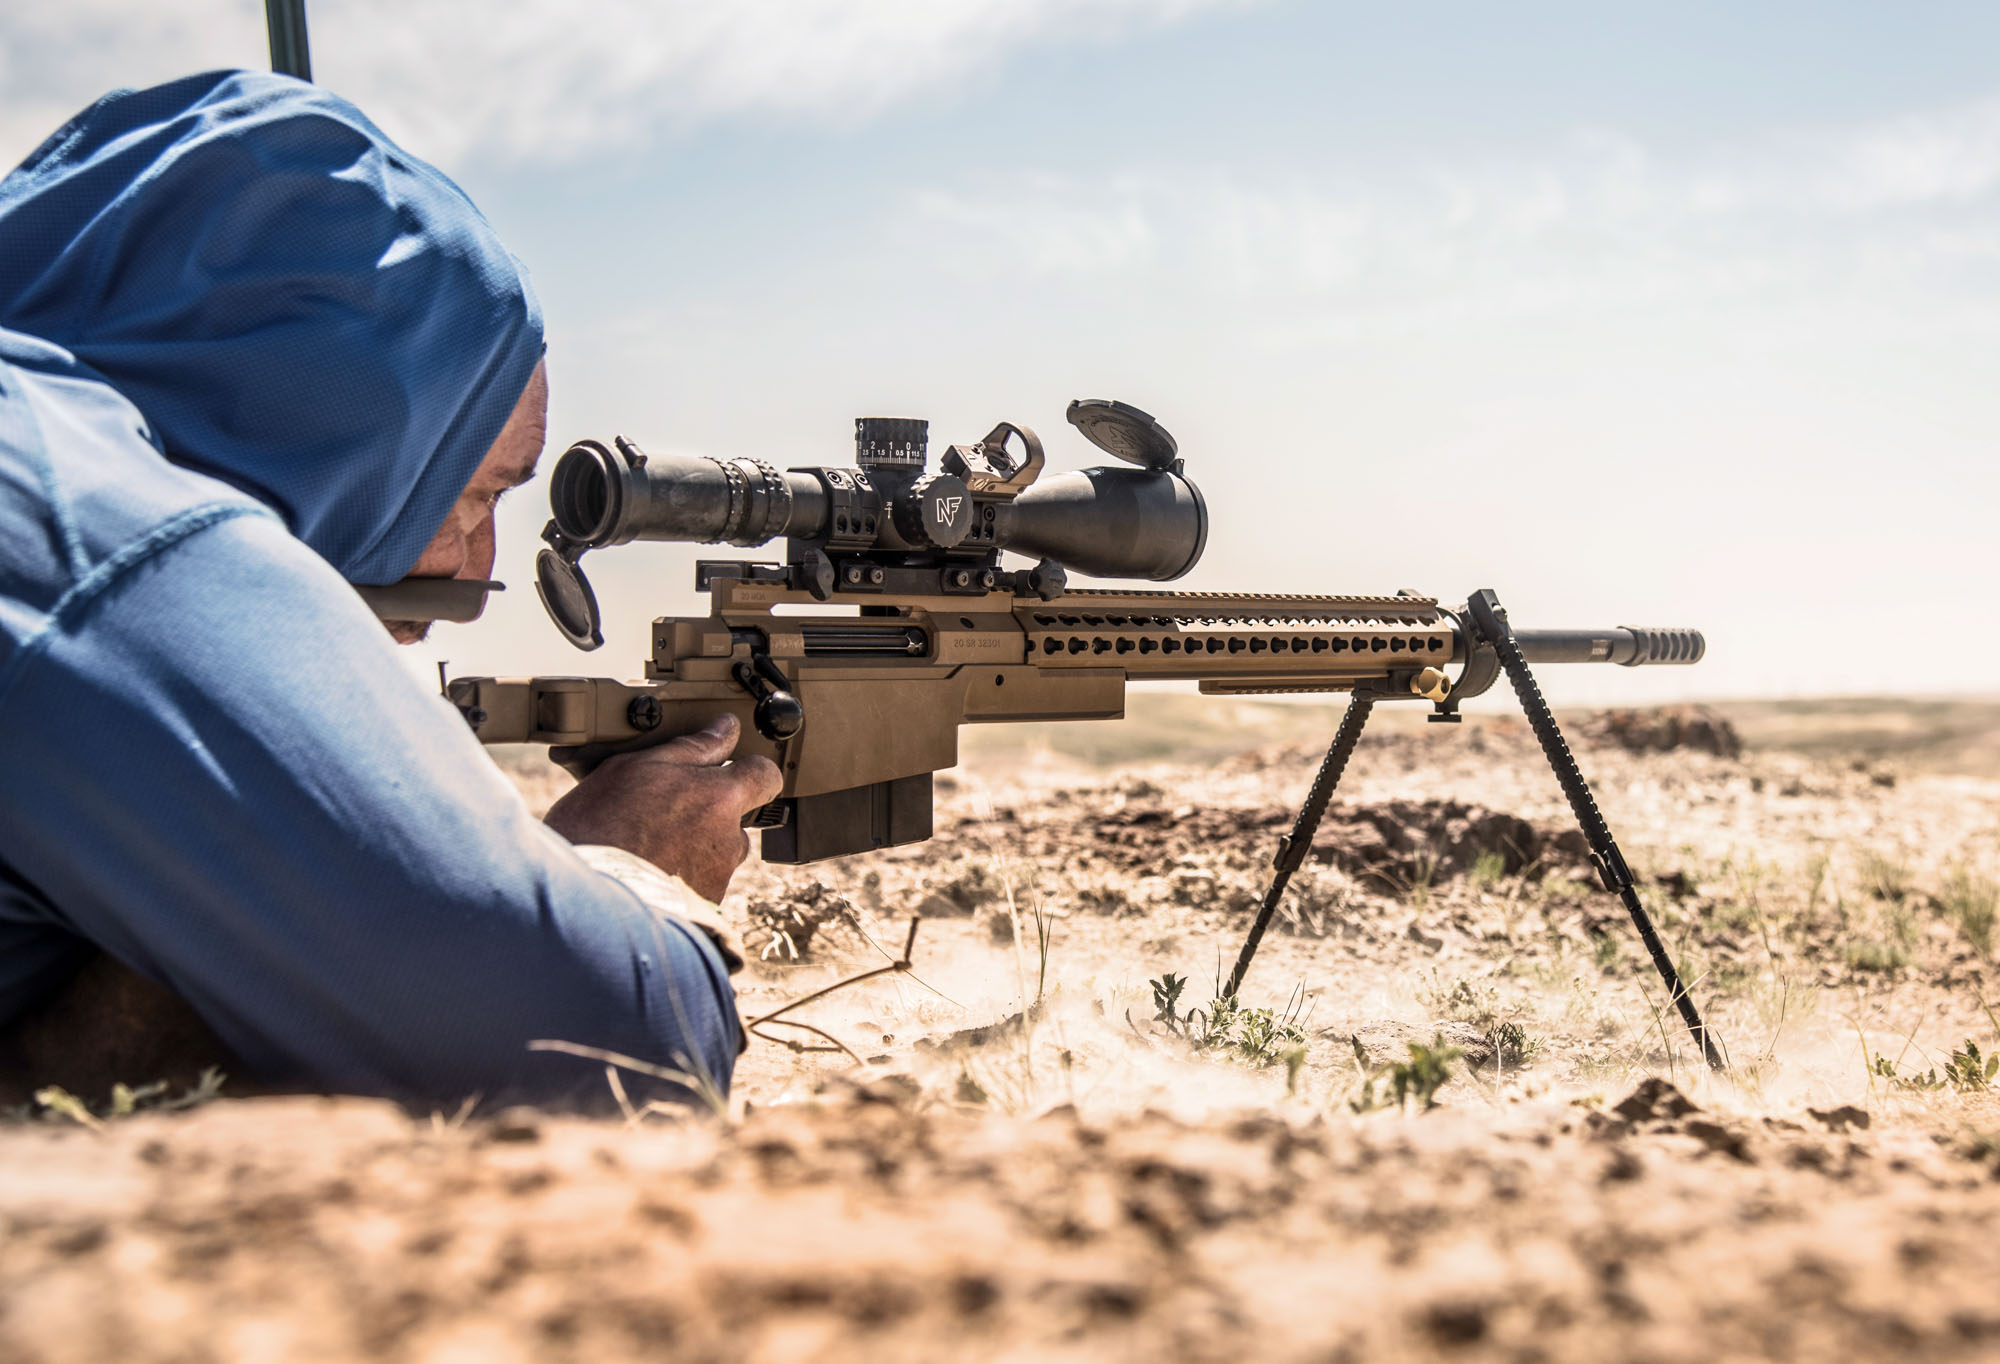 The Best Sniper Rifles Ever Made